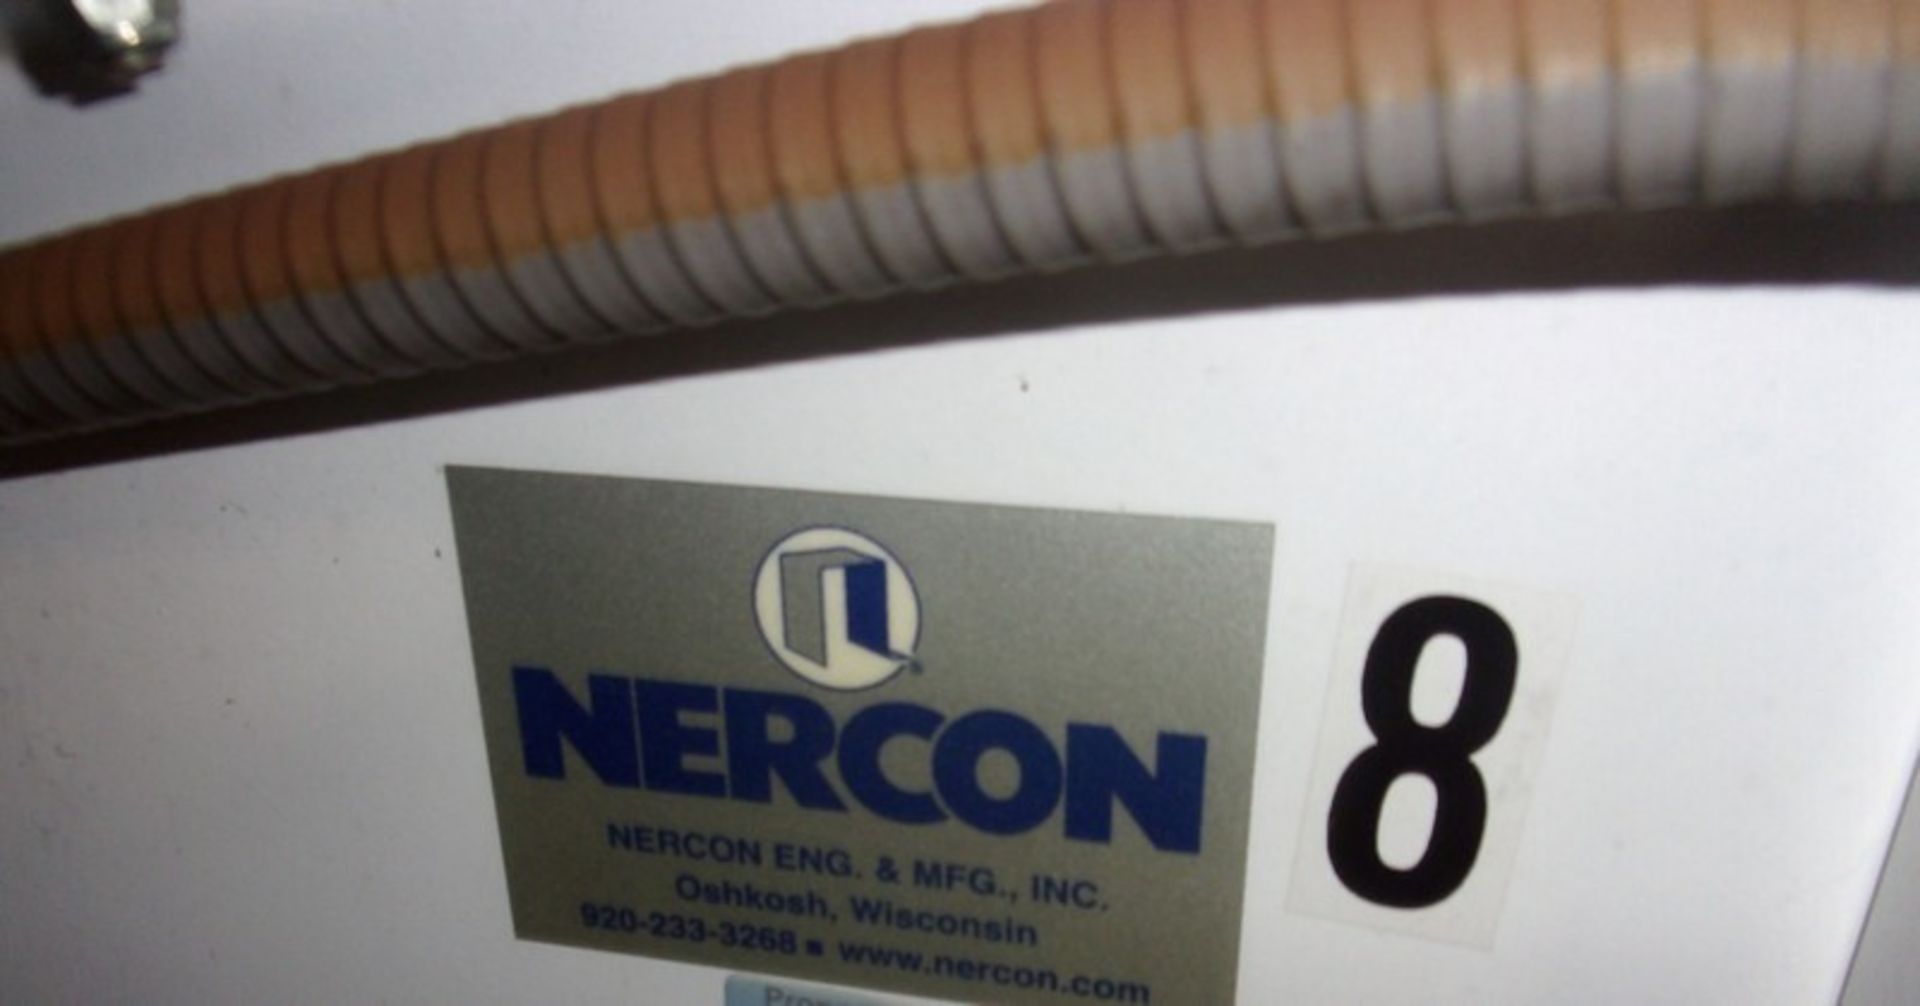 Nercon Incline Belt Conveyor, Aprox. 12 Inch Wide X 123 Inches Long, Infeed Height is 15 Inches, - Image 9 of 10